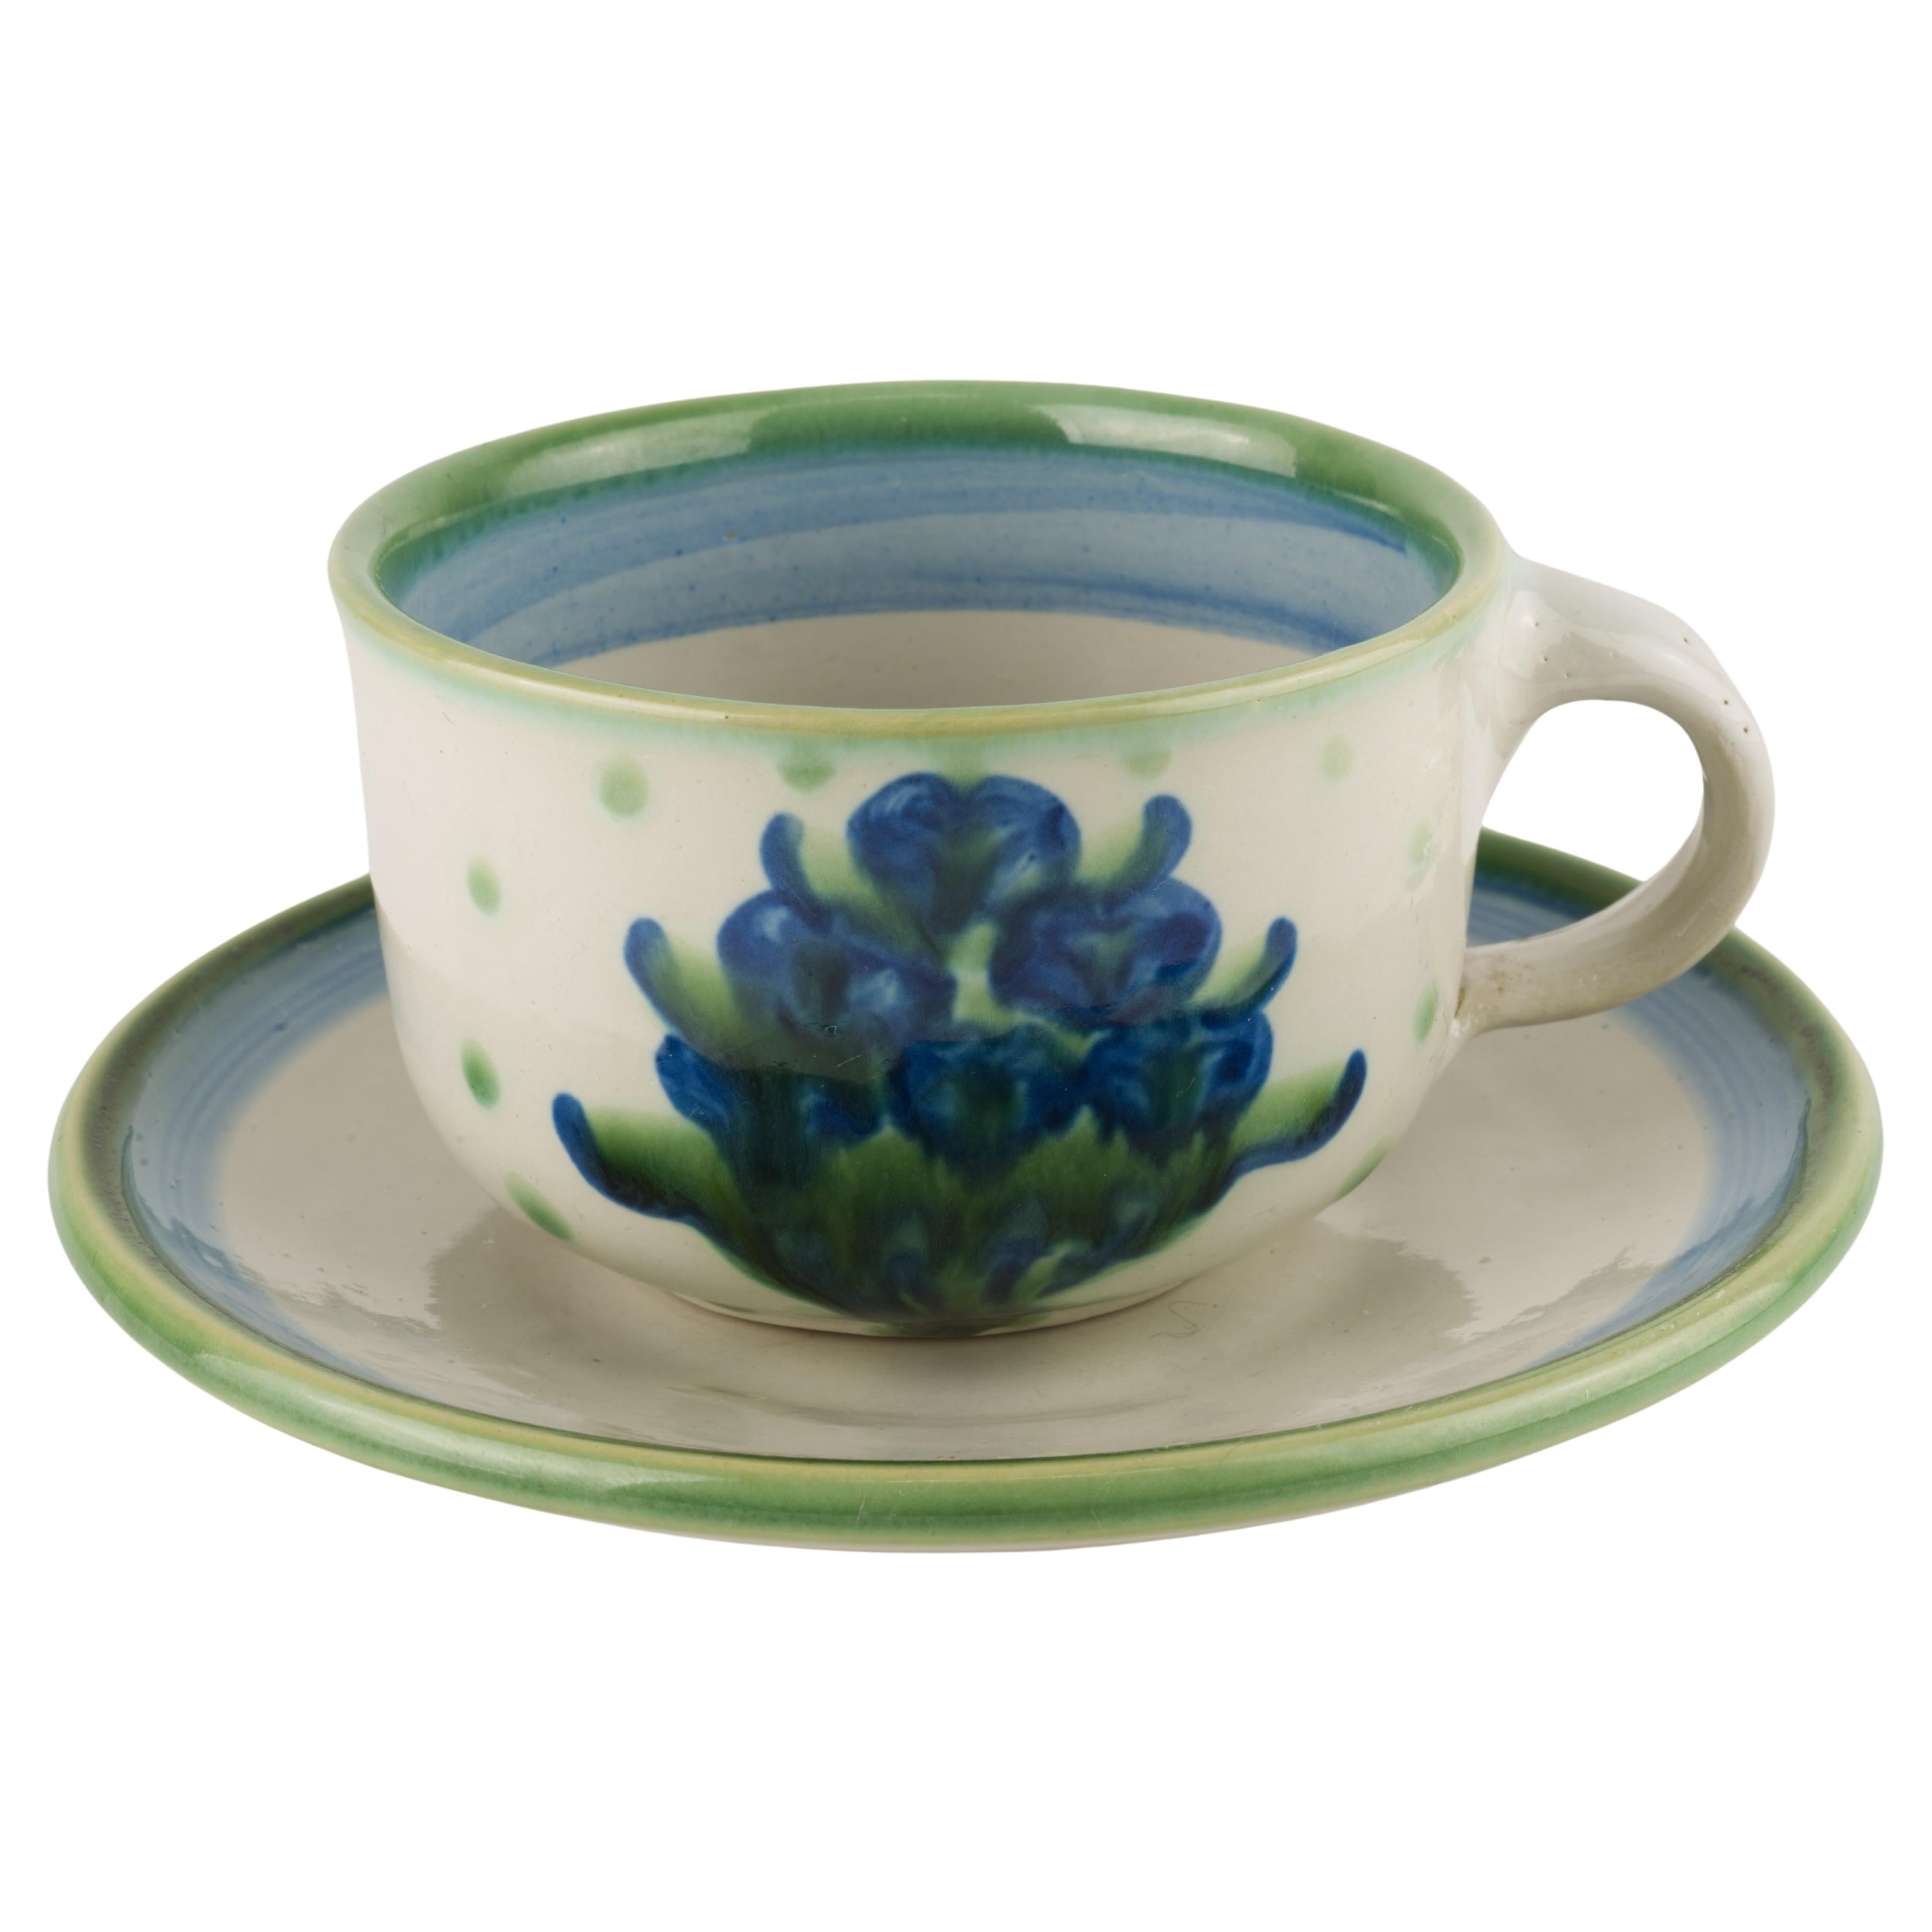 M.A. Hadley Pottery Cup and Saucer, Bouquet Blue and White